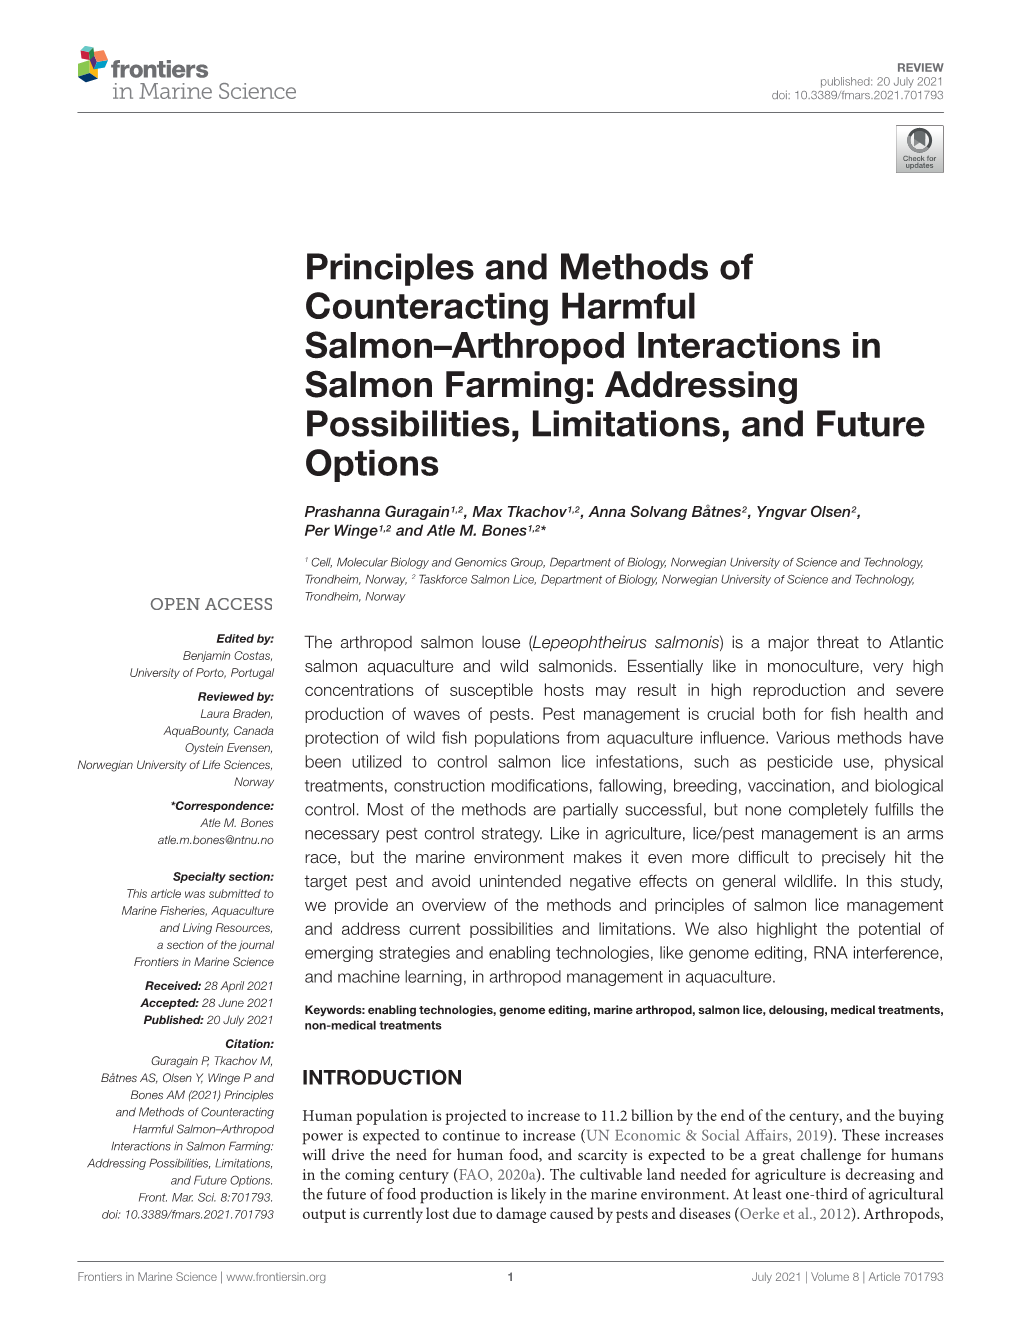 Principles and Methods of Counteracting Harmful Salmon–Arthropod Interactions in Salmon Farming: Addressing Possibilities, Limitations, and Future Options